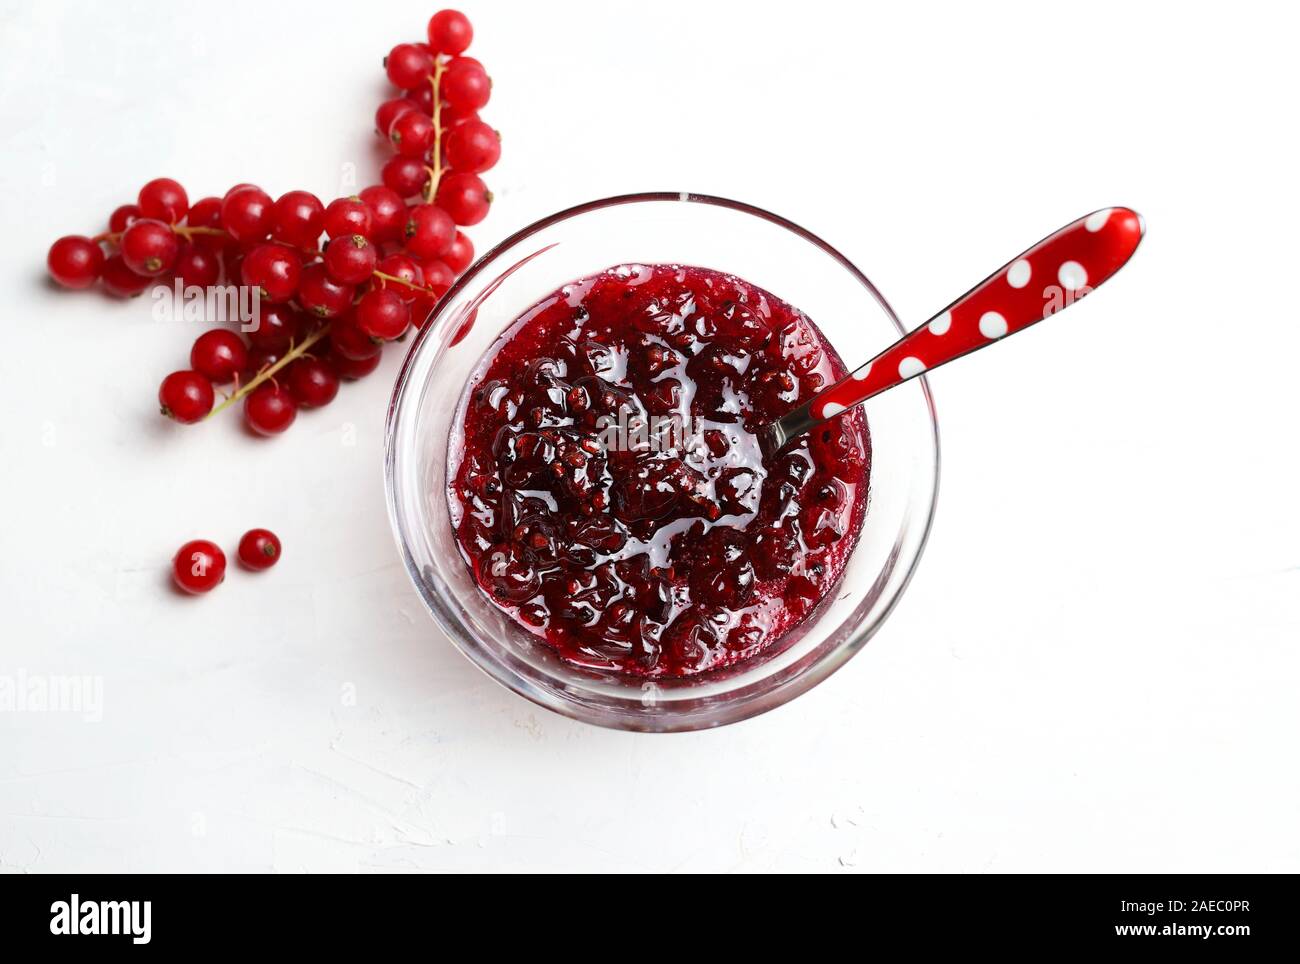 Homemade jam. Top view of red currant jam in a glass bowl and fresh currant  on white background Stock Photo - Alamy